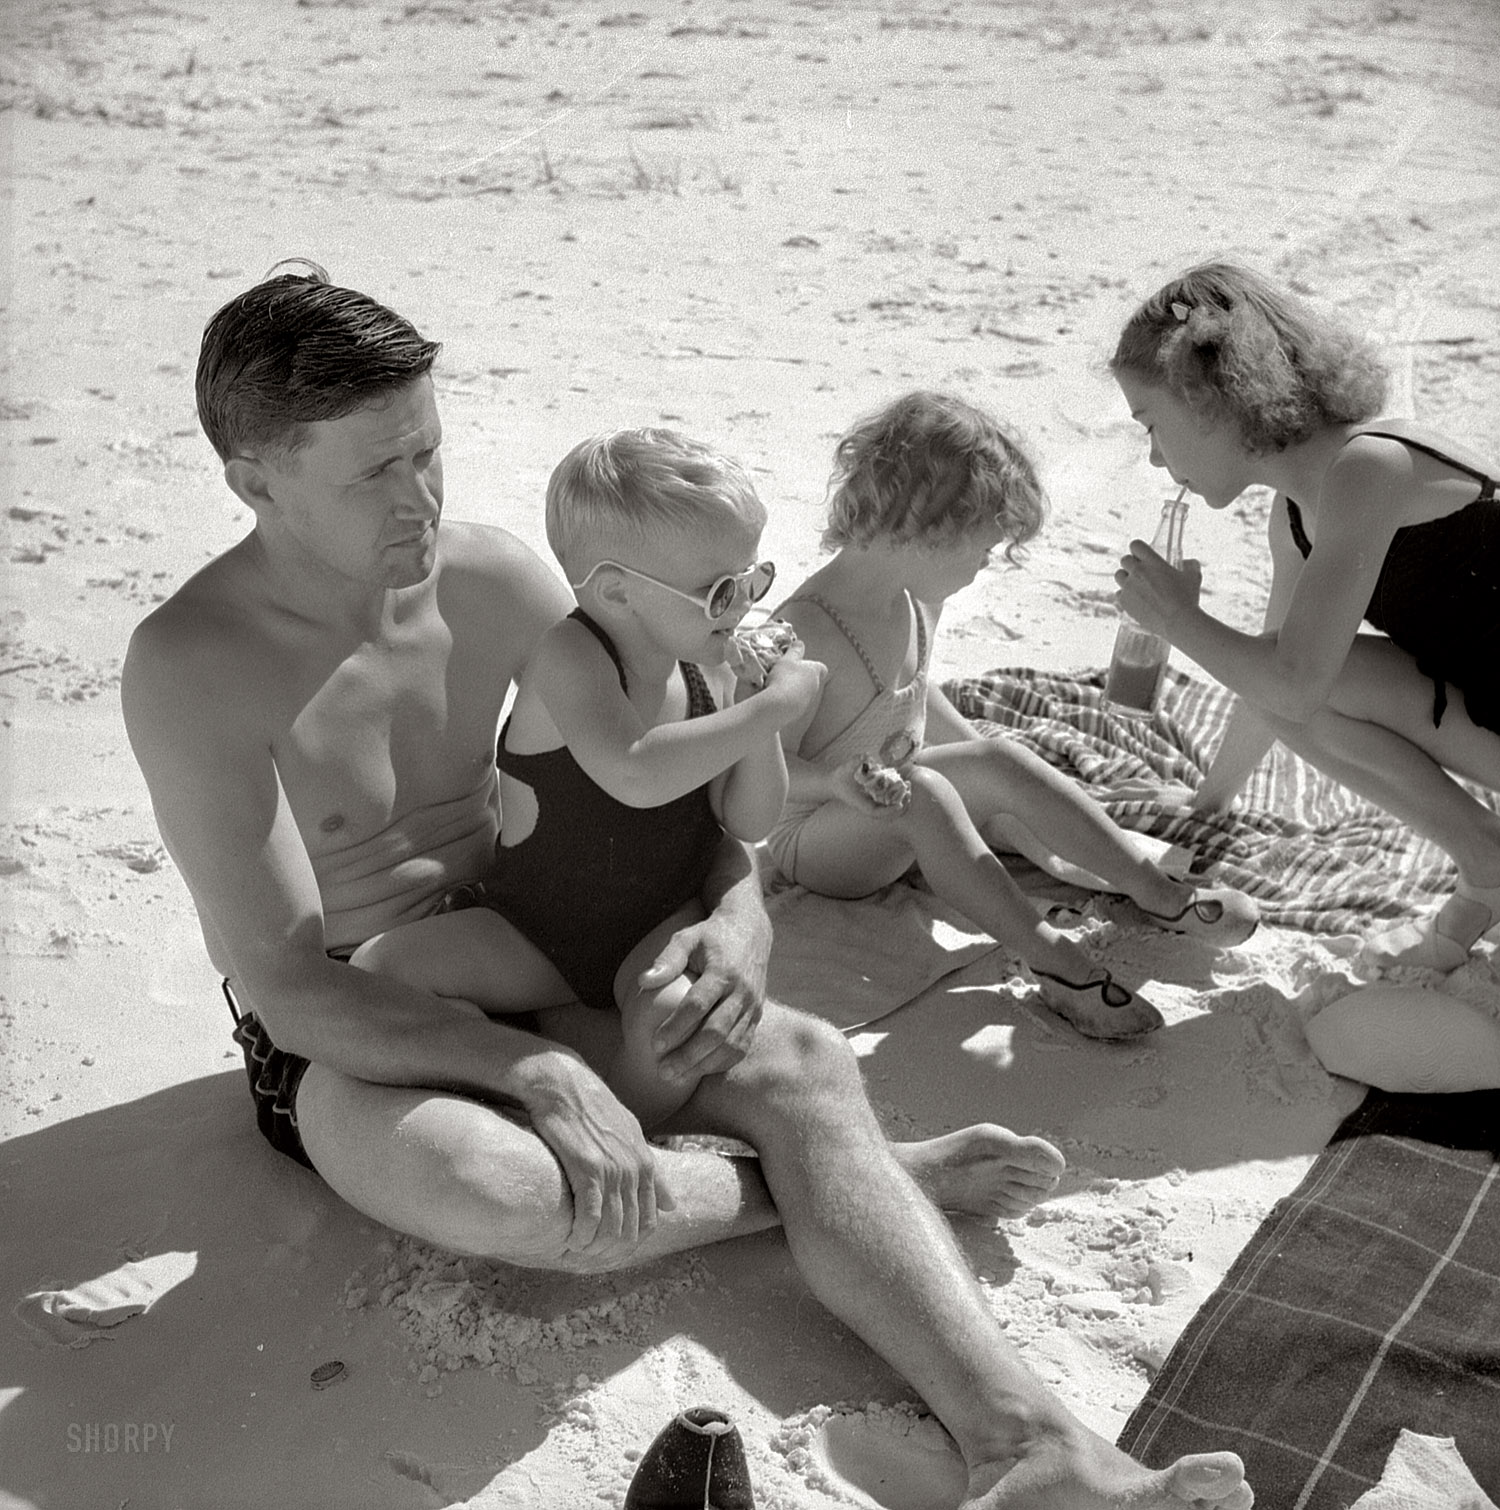 January 1941. Sarasota, Florida. "Guest of Sarasota trailer park with his family, picnicking at the beach." Photograph by Marion Post Wolcott. View full size.